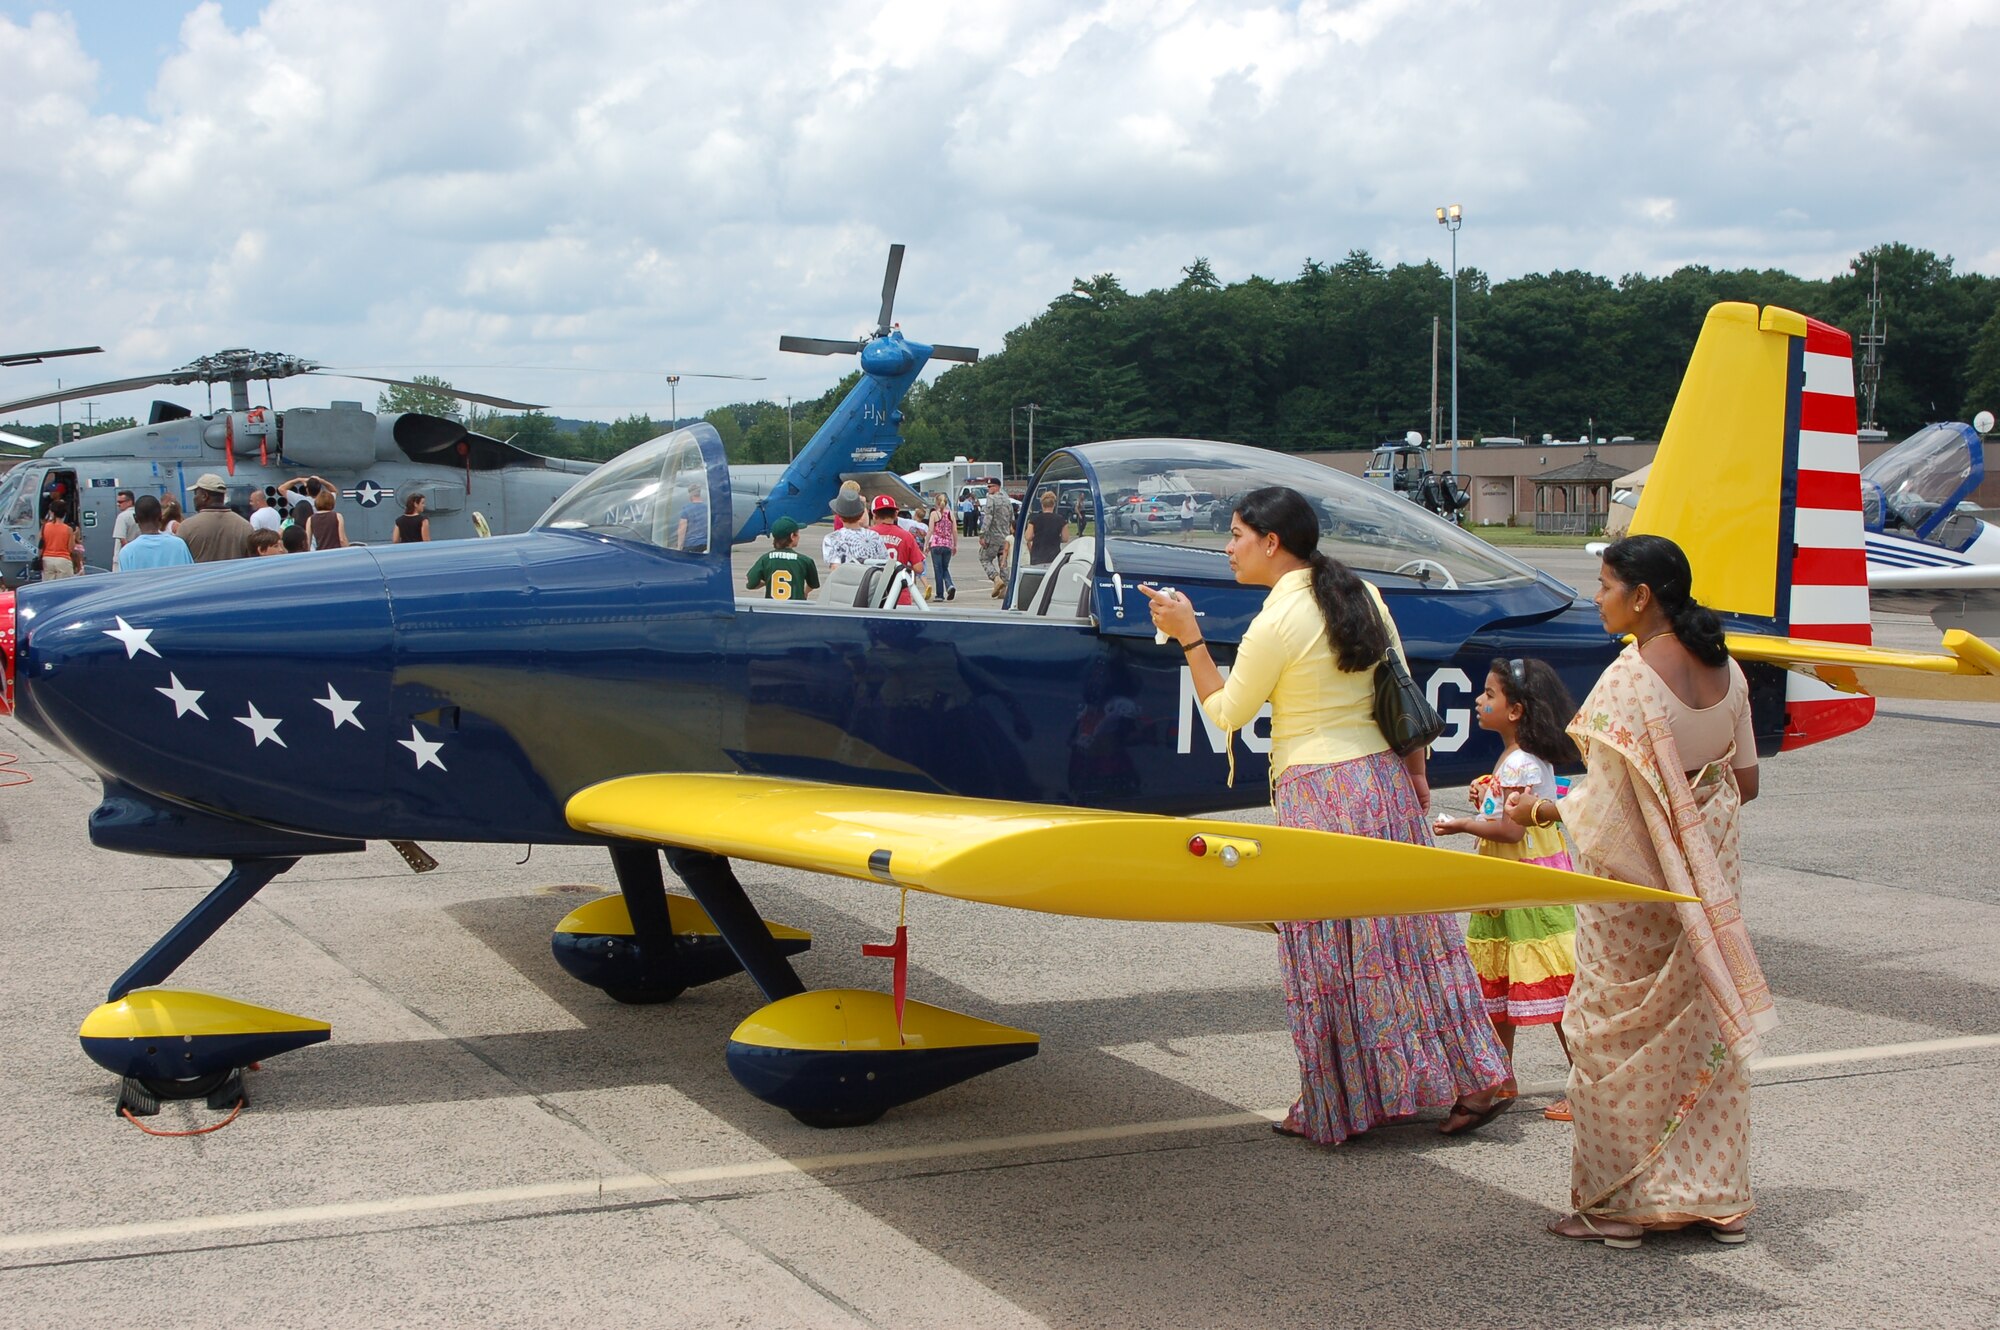 Curious visitors check out one of the experimental aircraft from EAA Chapter 166 during the Space and Aviation Day open house at Bradley ANG Base, East Granby, Conn. July 18, 2009.  The New England Air Museum and the Connecticut Fire Academy also opened their doors to the public as part of the event.  (U.S. Air Force photo by Tech. Sgt. Joshua Mead)